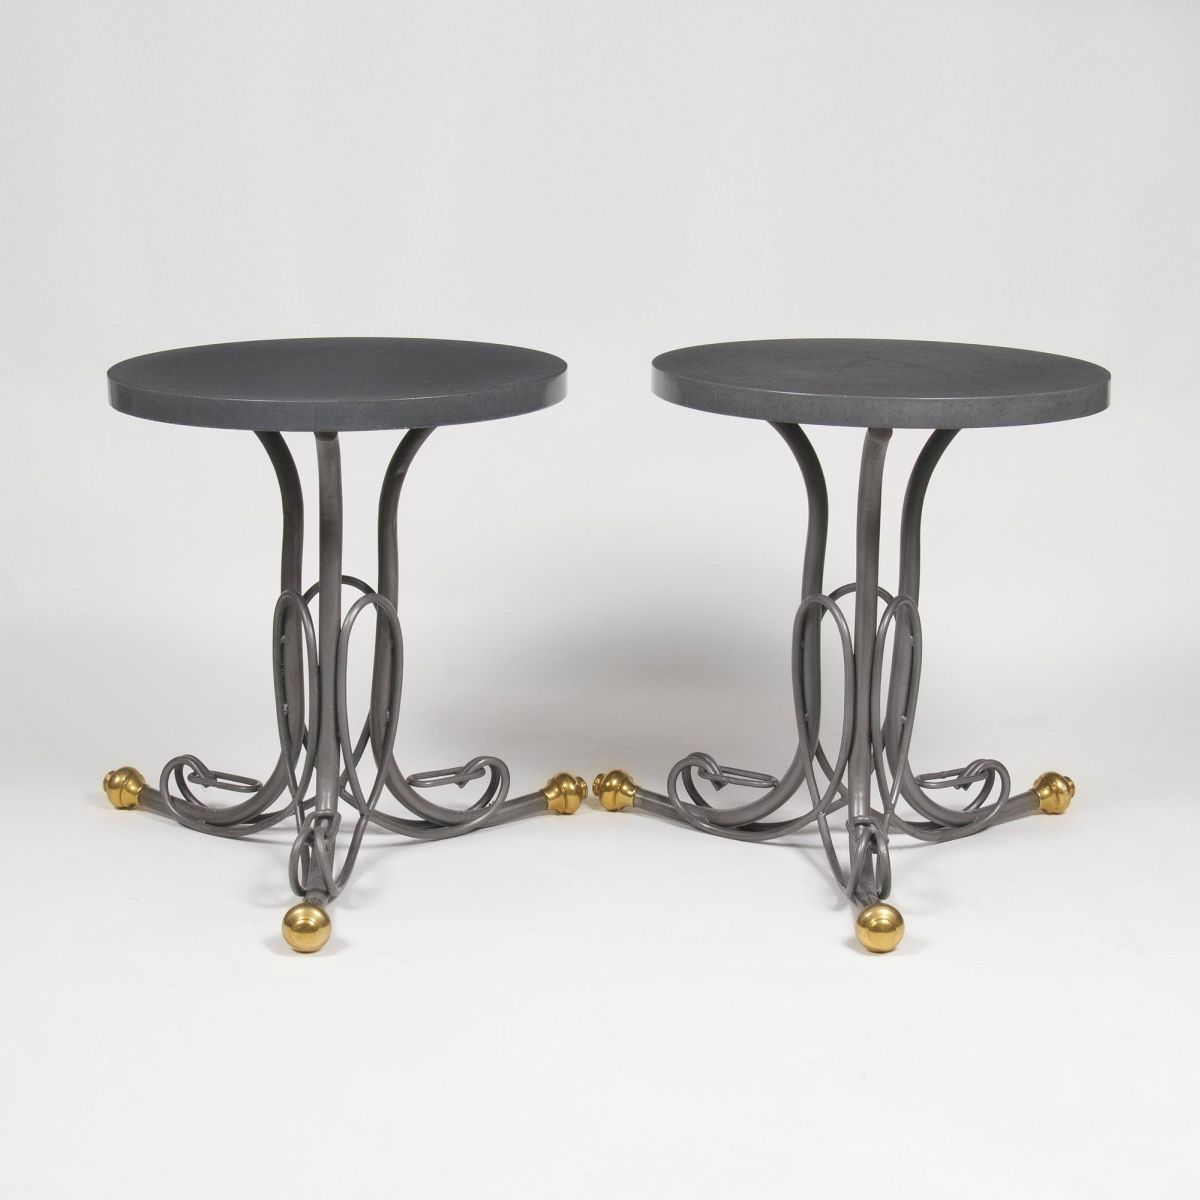 A Pair of Vintage Coffee Tables